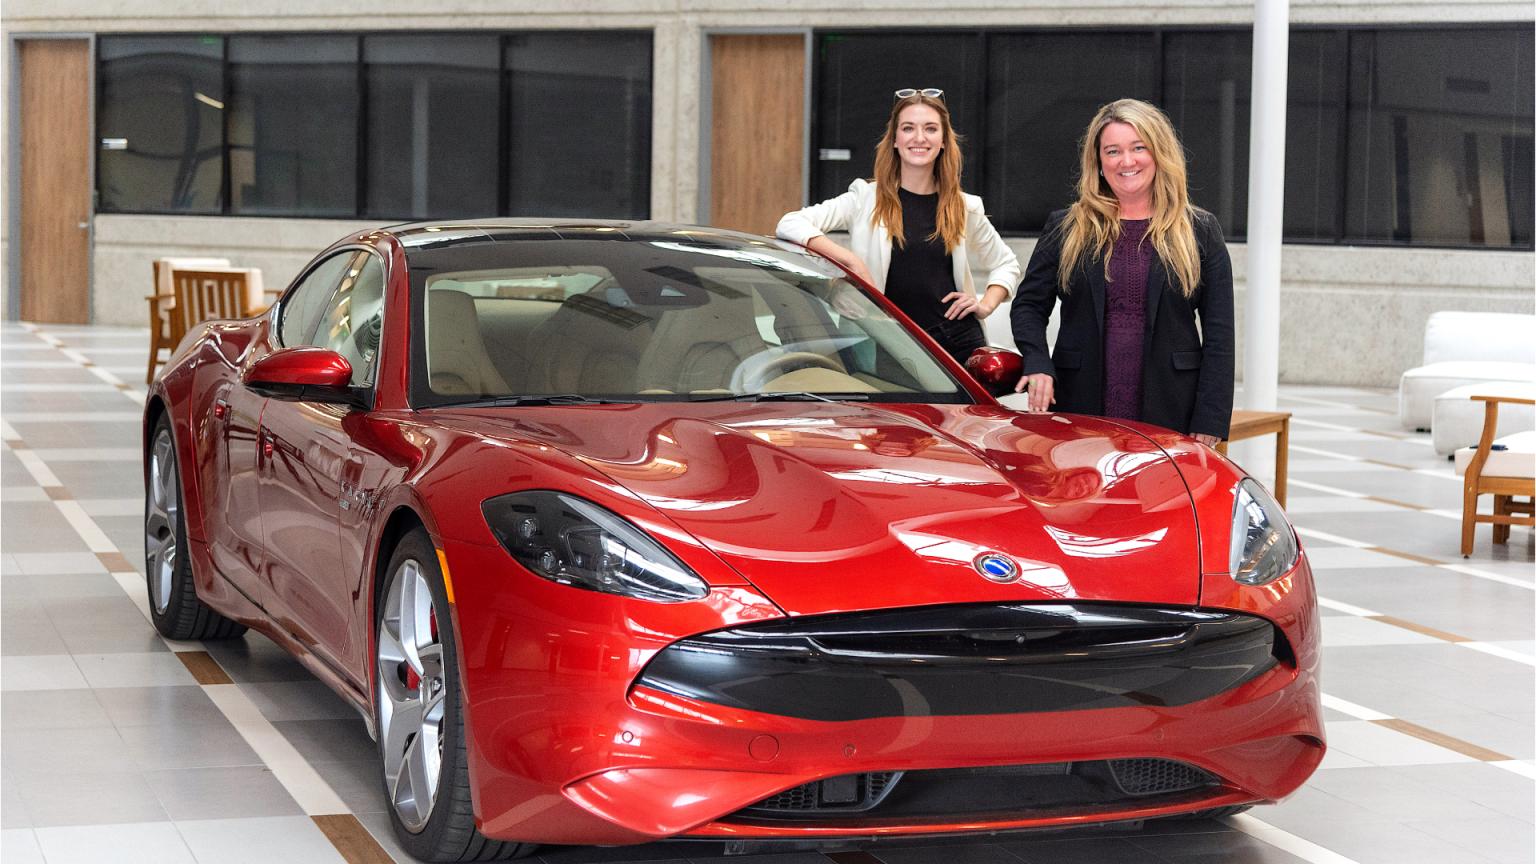 Jenn Voelker and Julia Vorpahl are standing next to a red car designed by Karma Automotive.